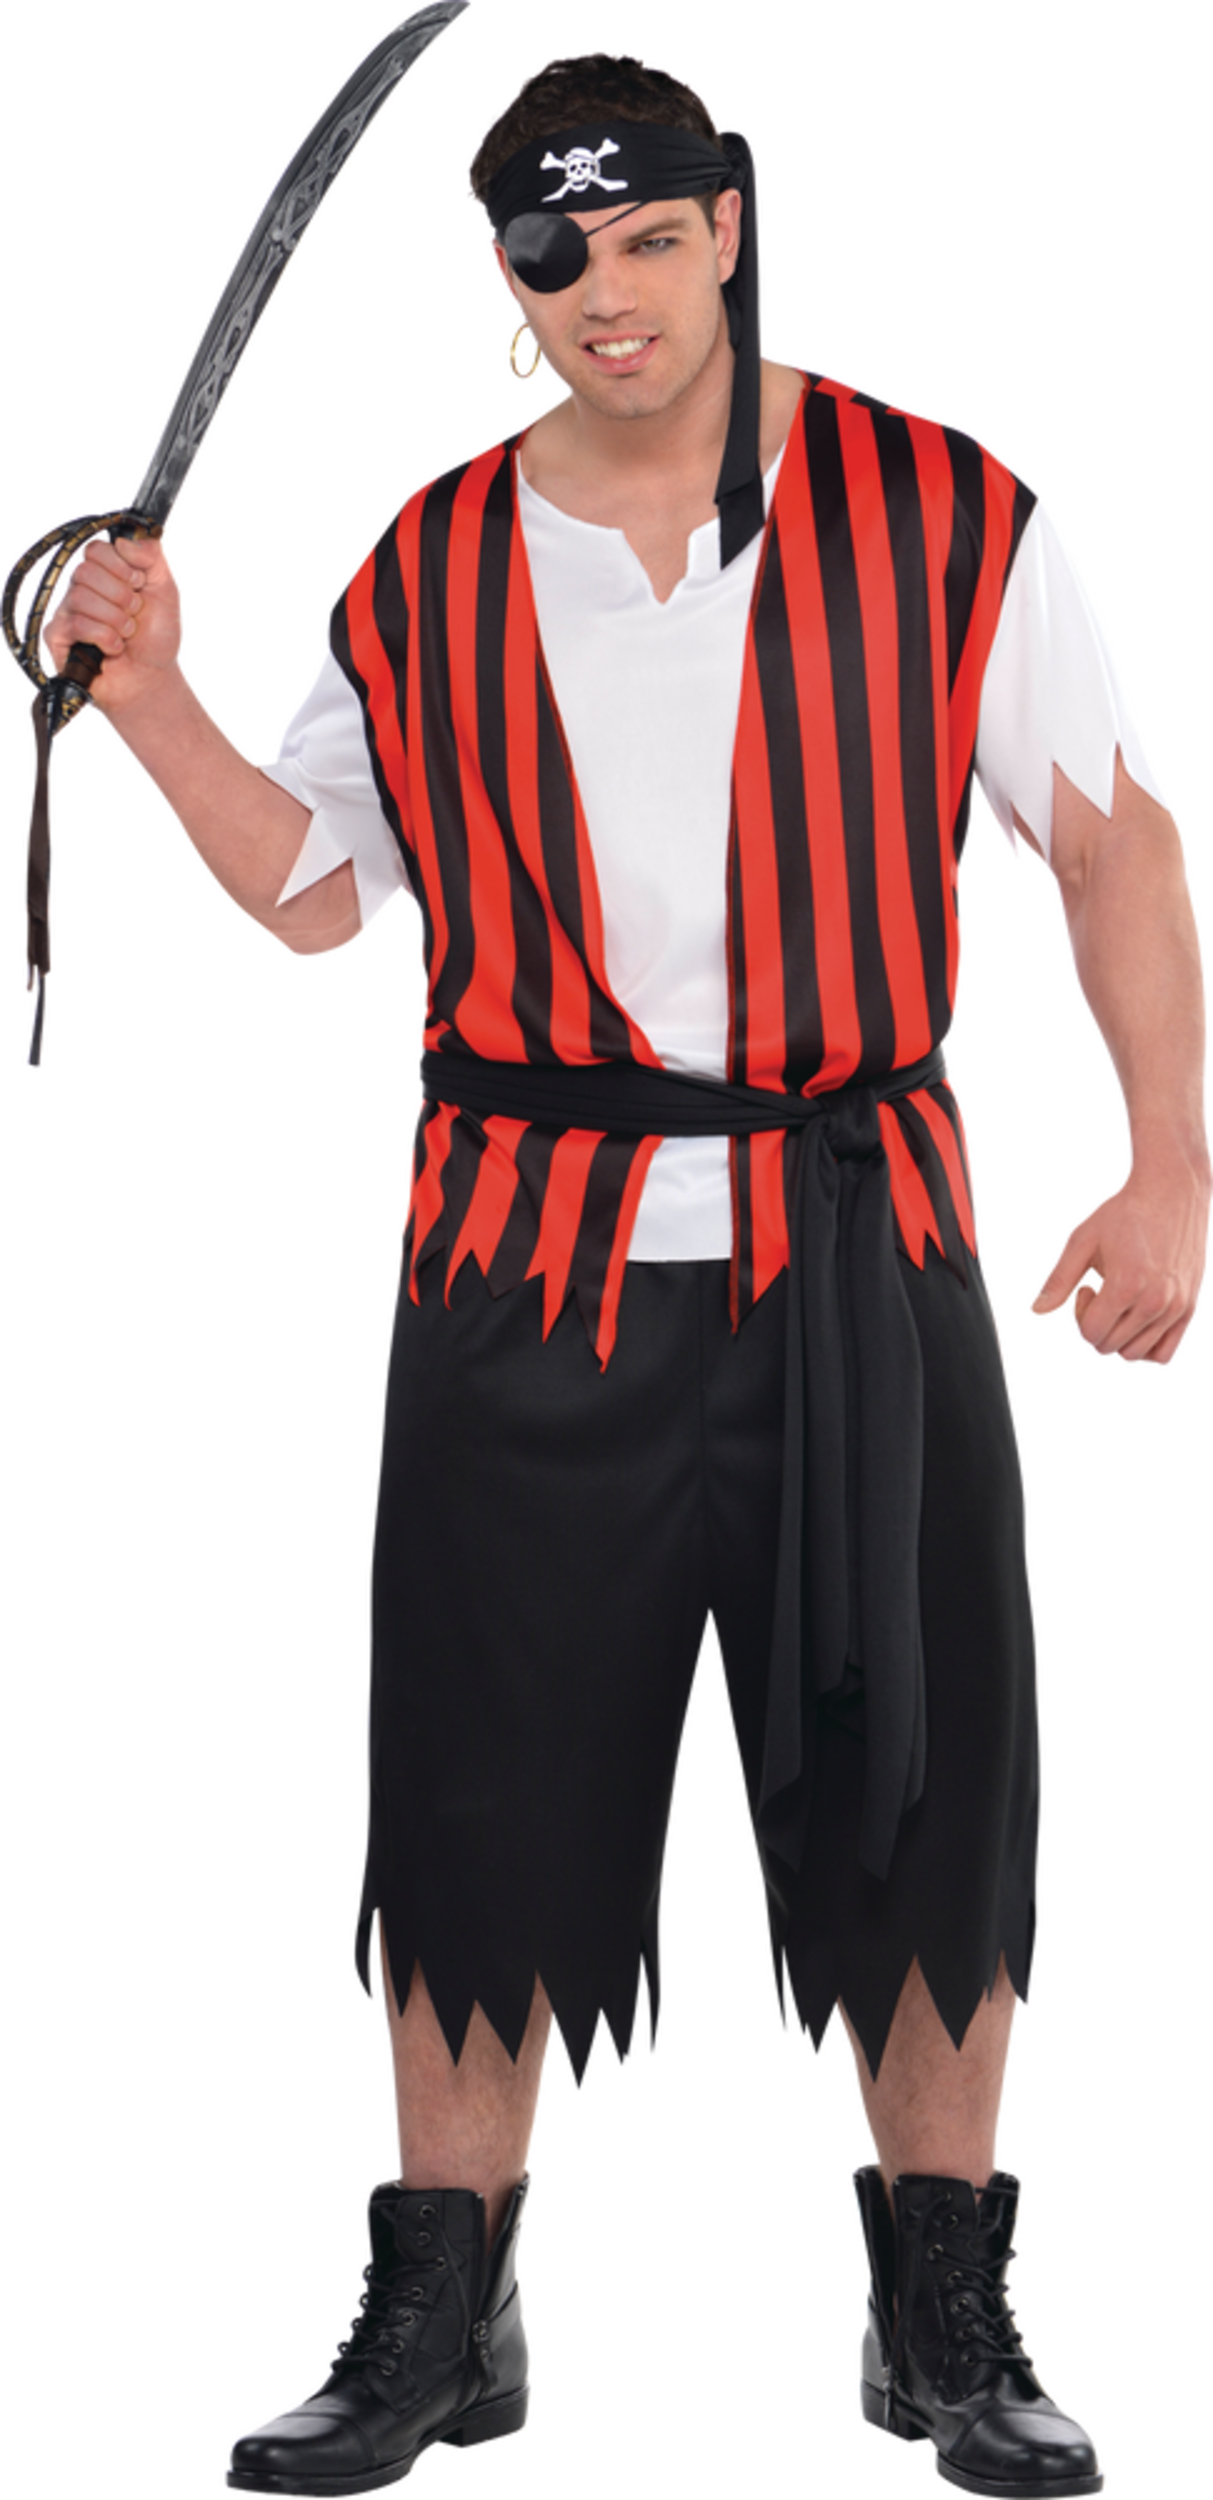 Mens Ahoy Matey Pirate Blackred Striped Outfit With Shirtpantsbandana Halloween Costume 6146